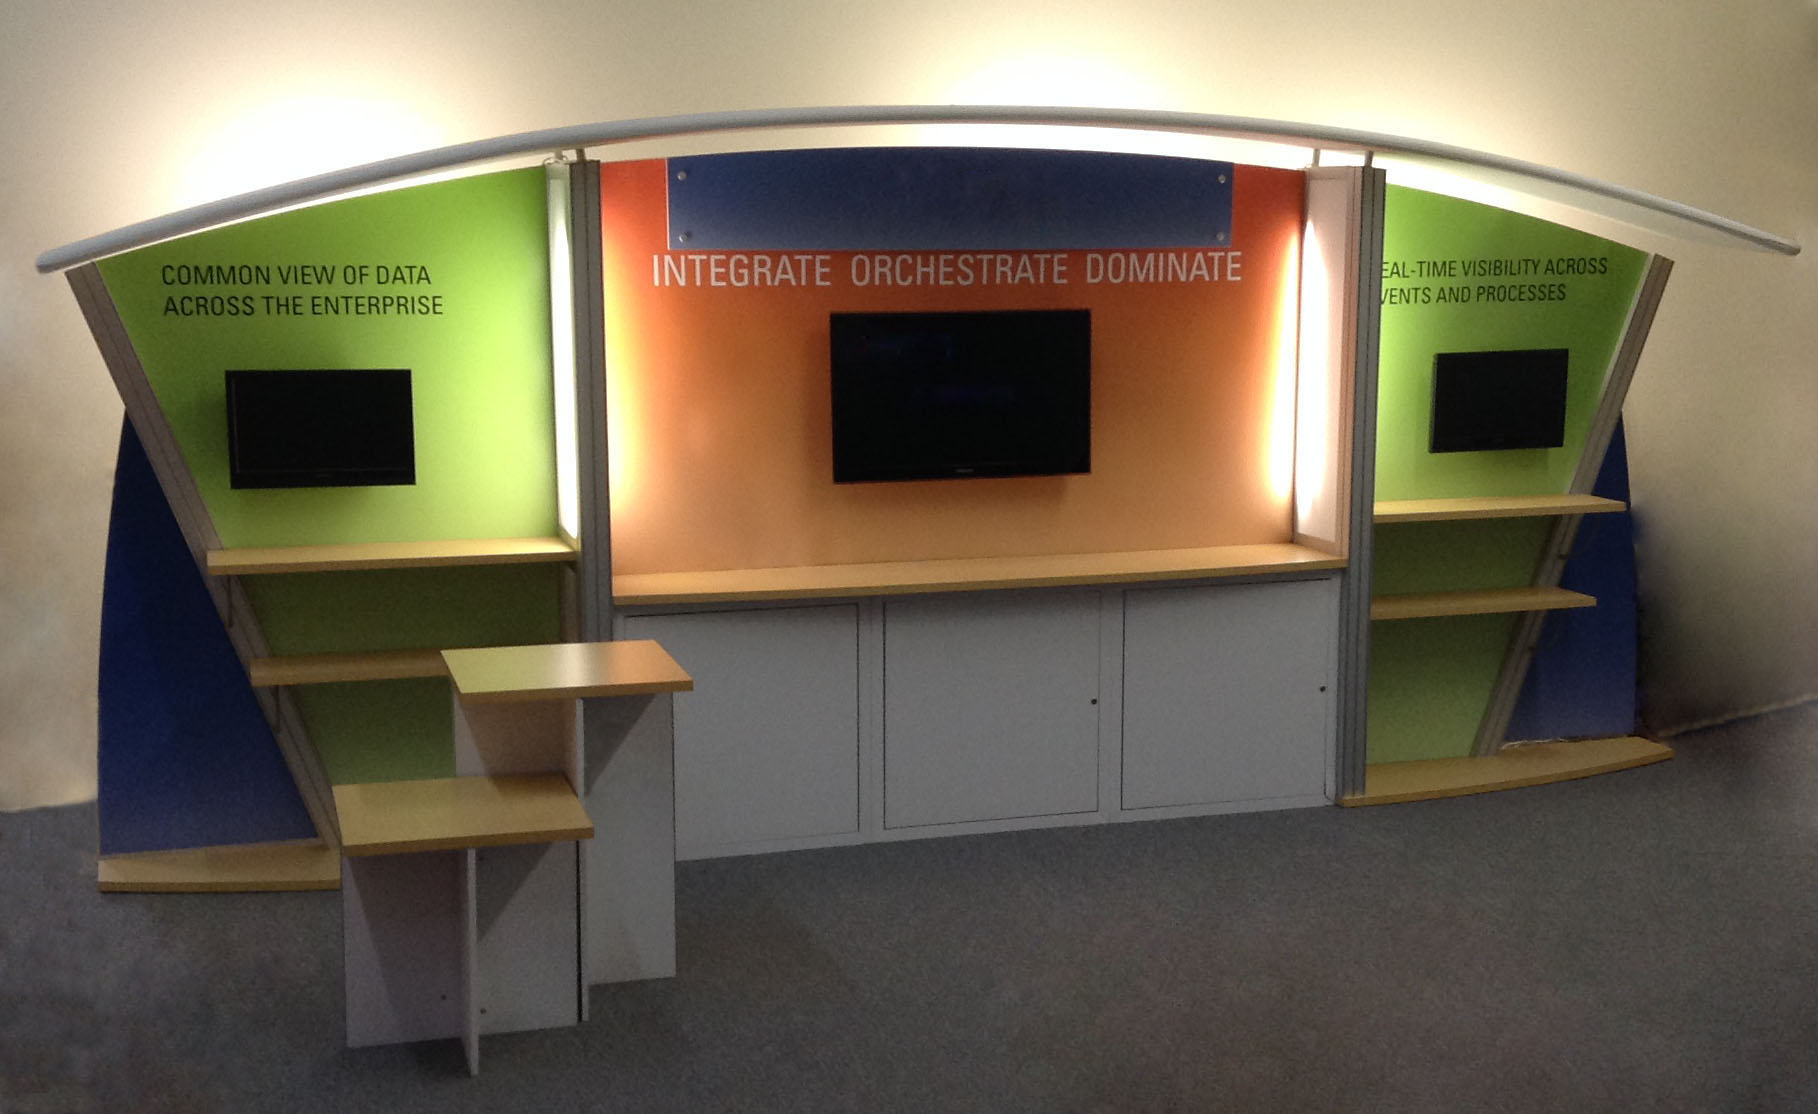 Pre-owned exhibits: 10x20 custom modular exhibit with storage, shelves, monitor mounts and counters